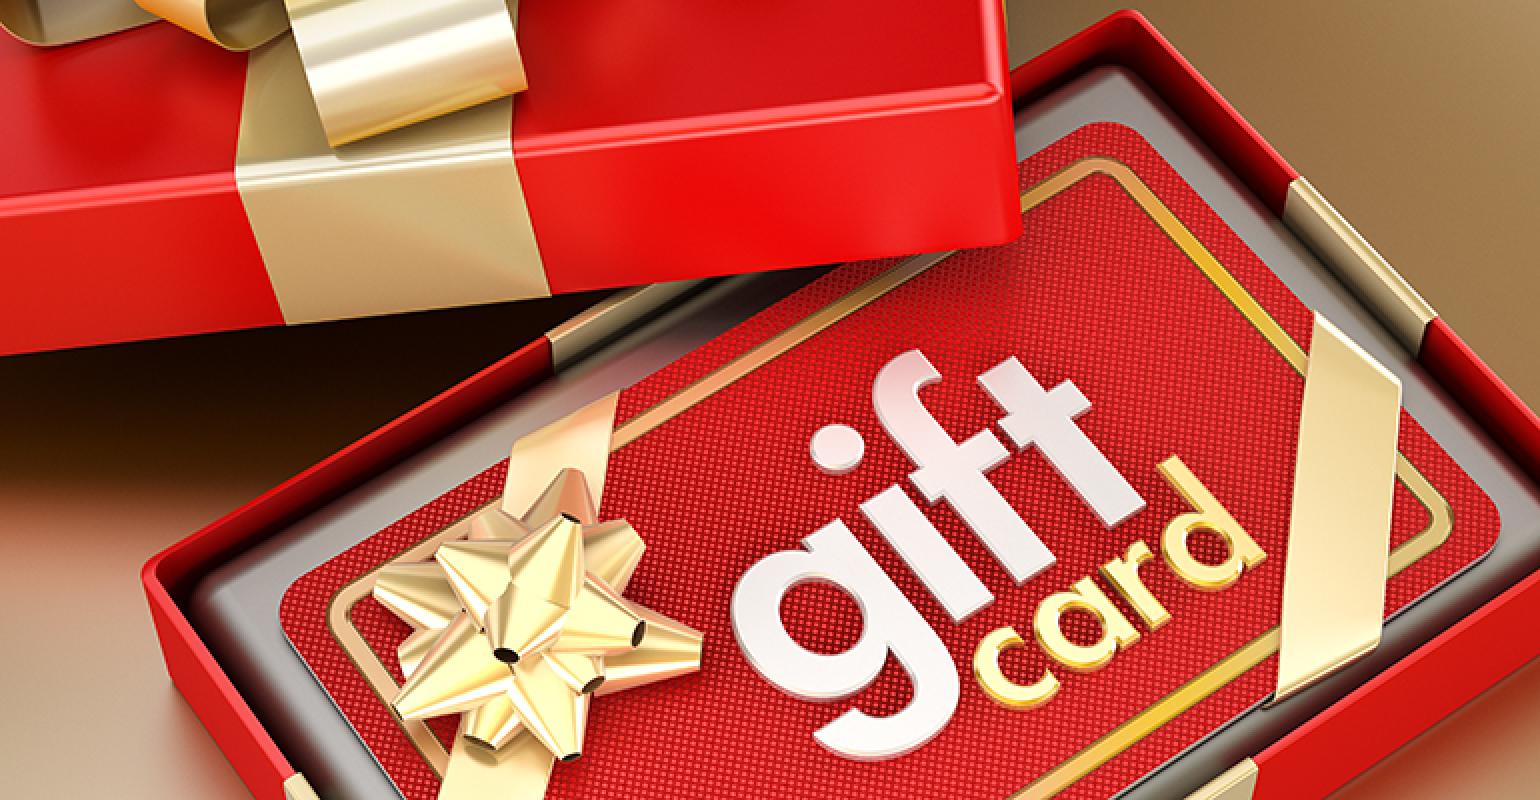 Restaurant gift cards appeal to 72 of consumers, survey finds Nation